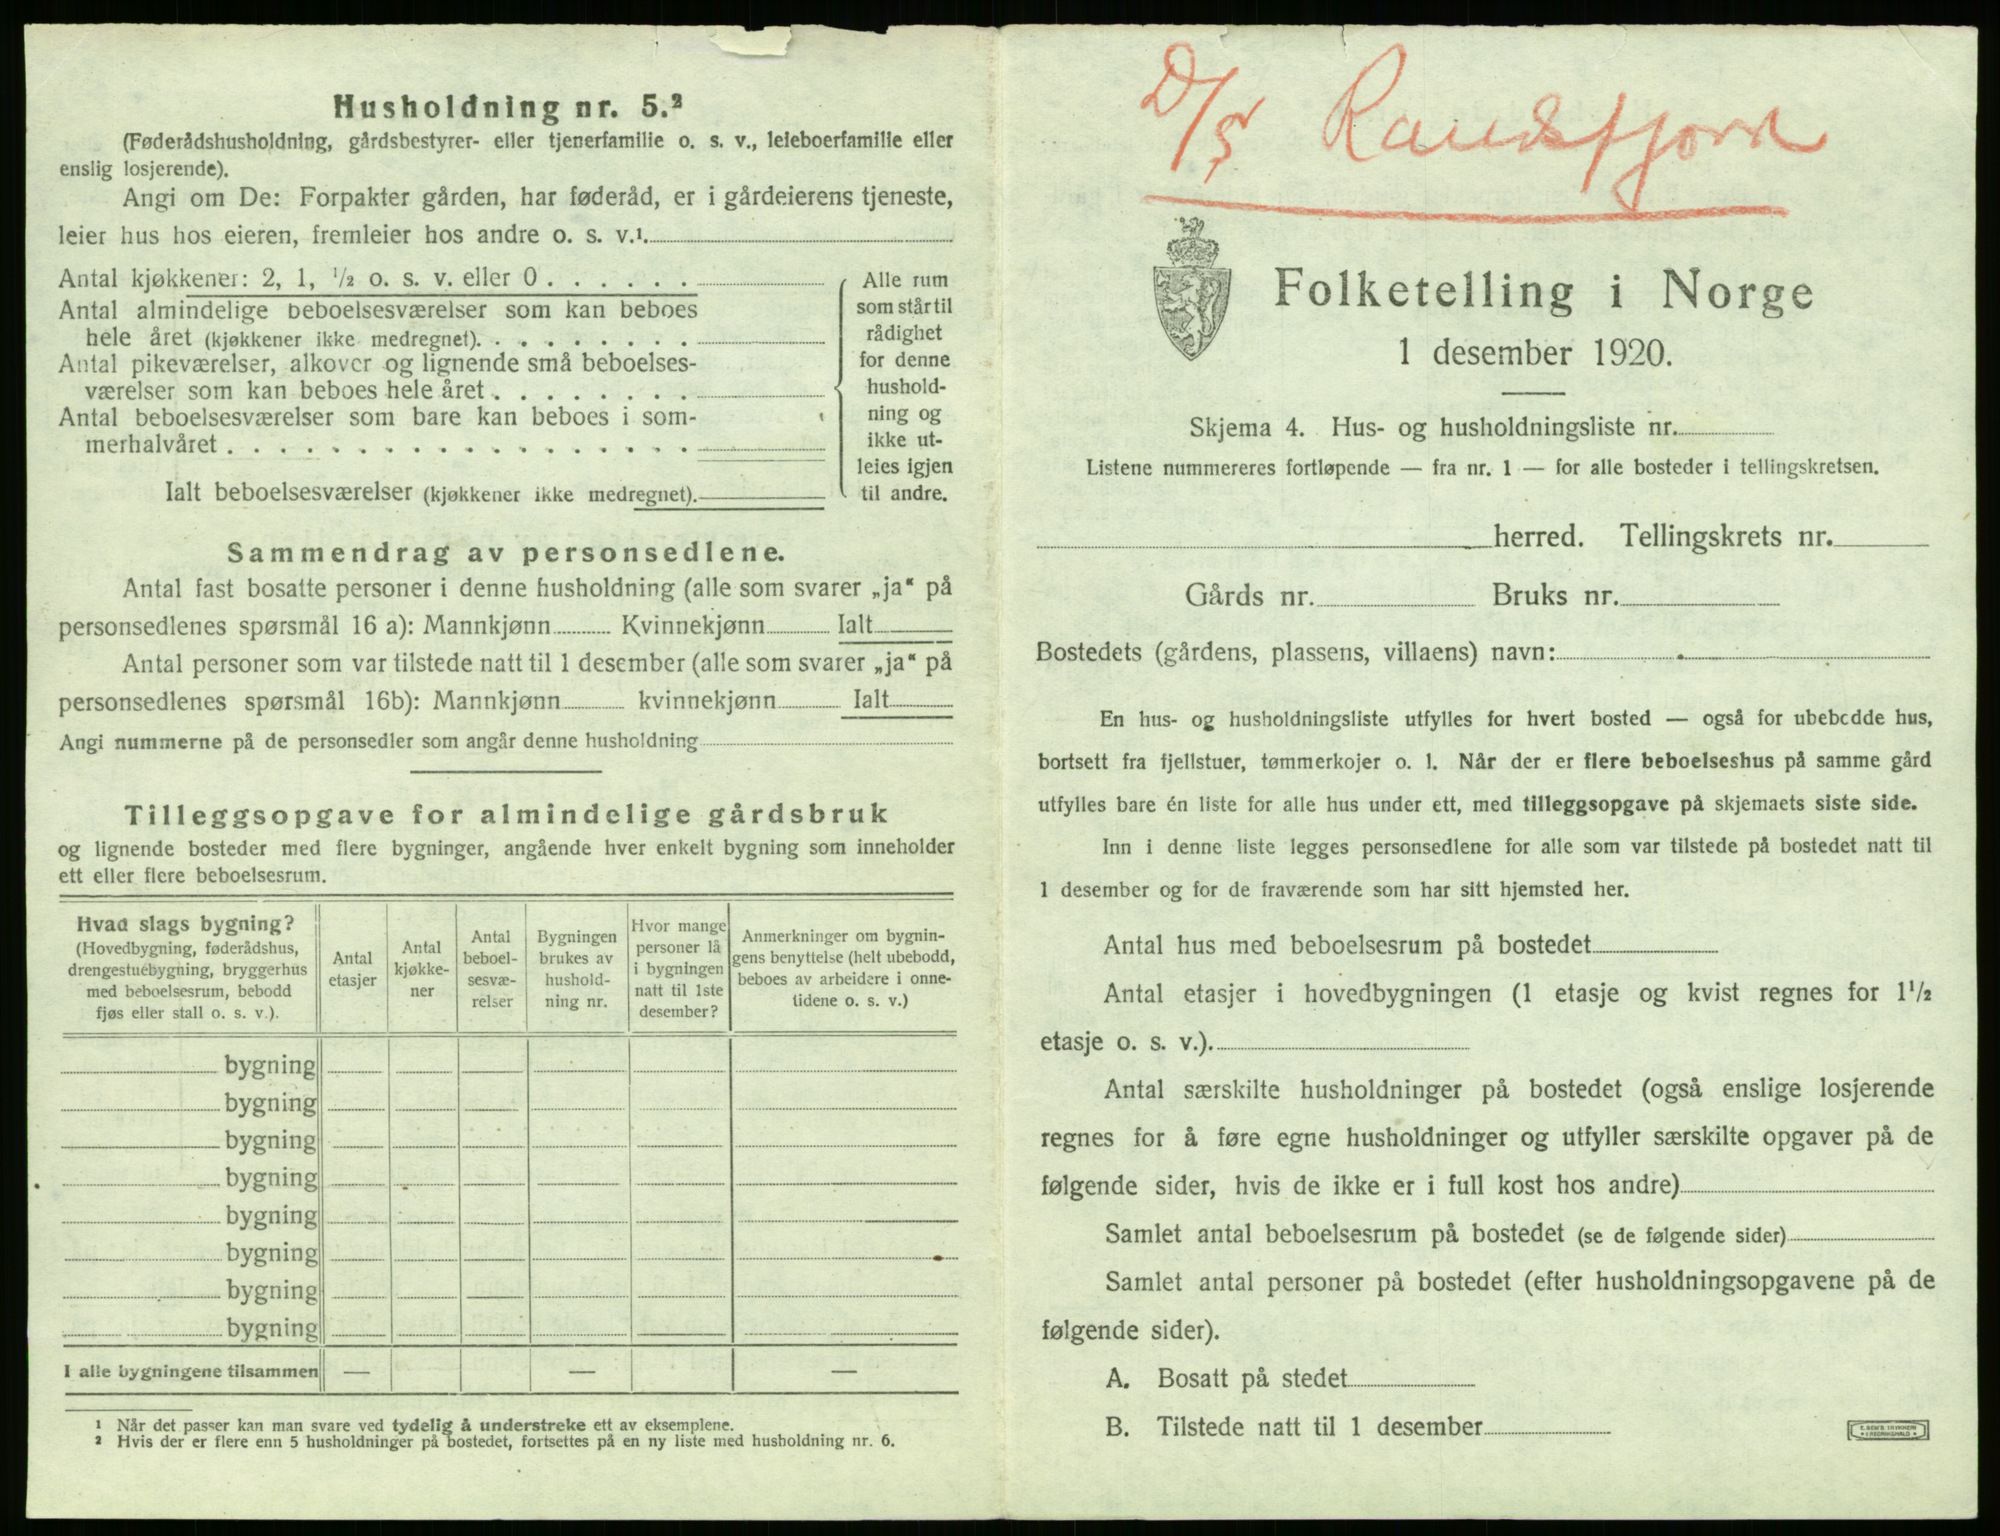 RA, 1920 census: Additional forms, 1920, p. 19